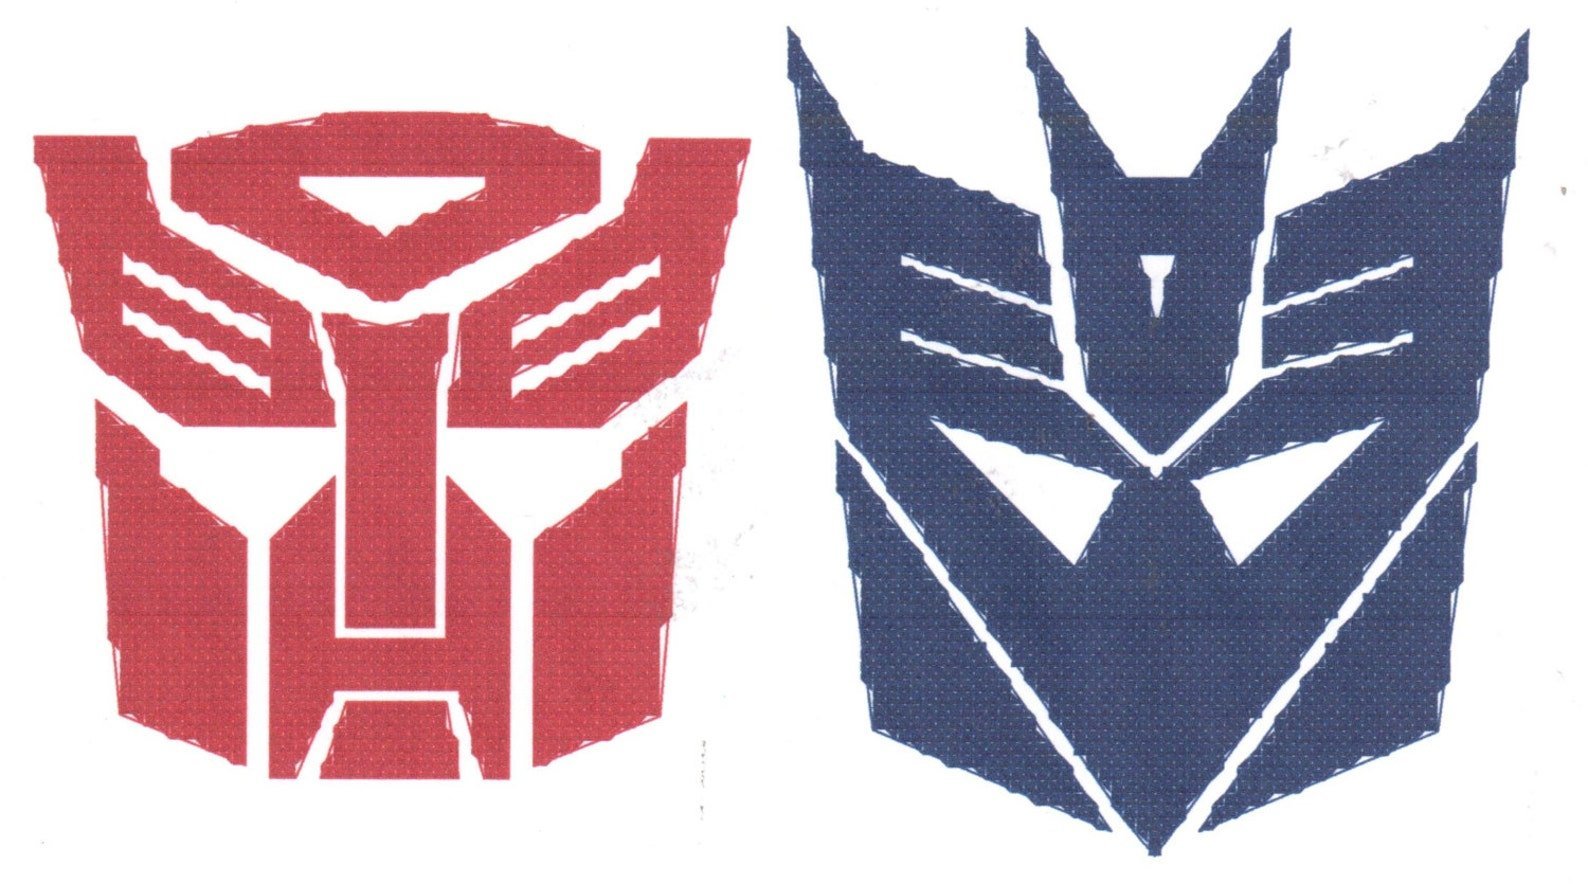 Transformers Autobots and Decepticons